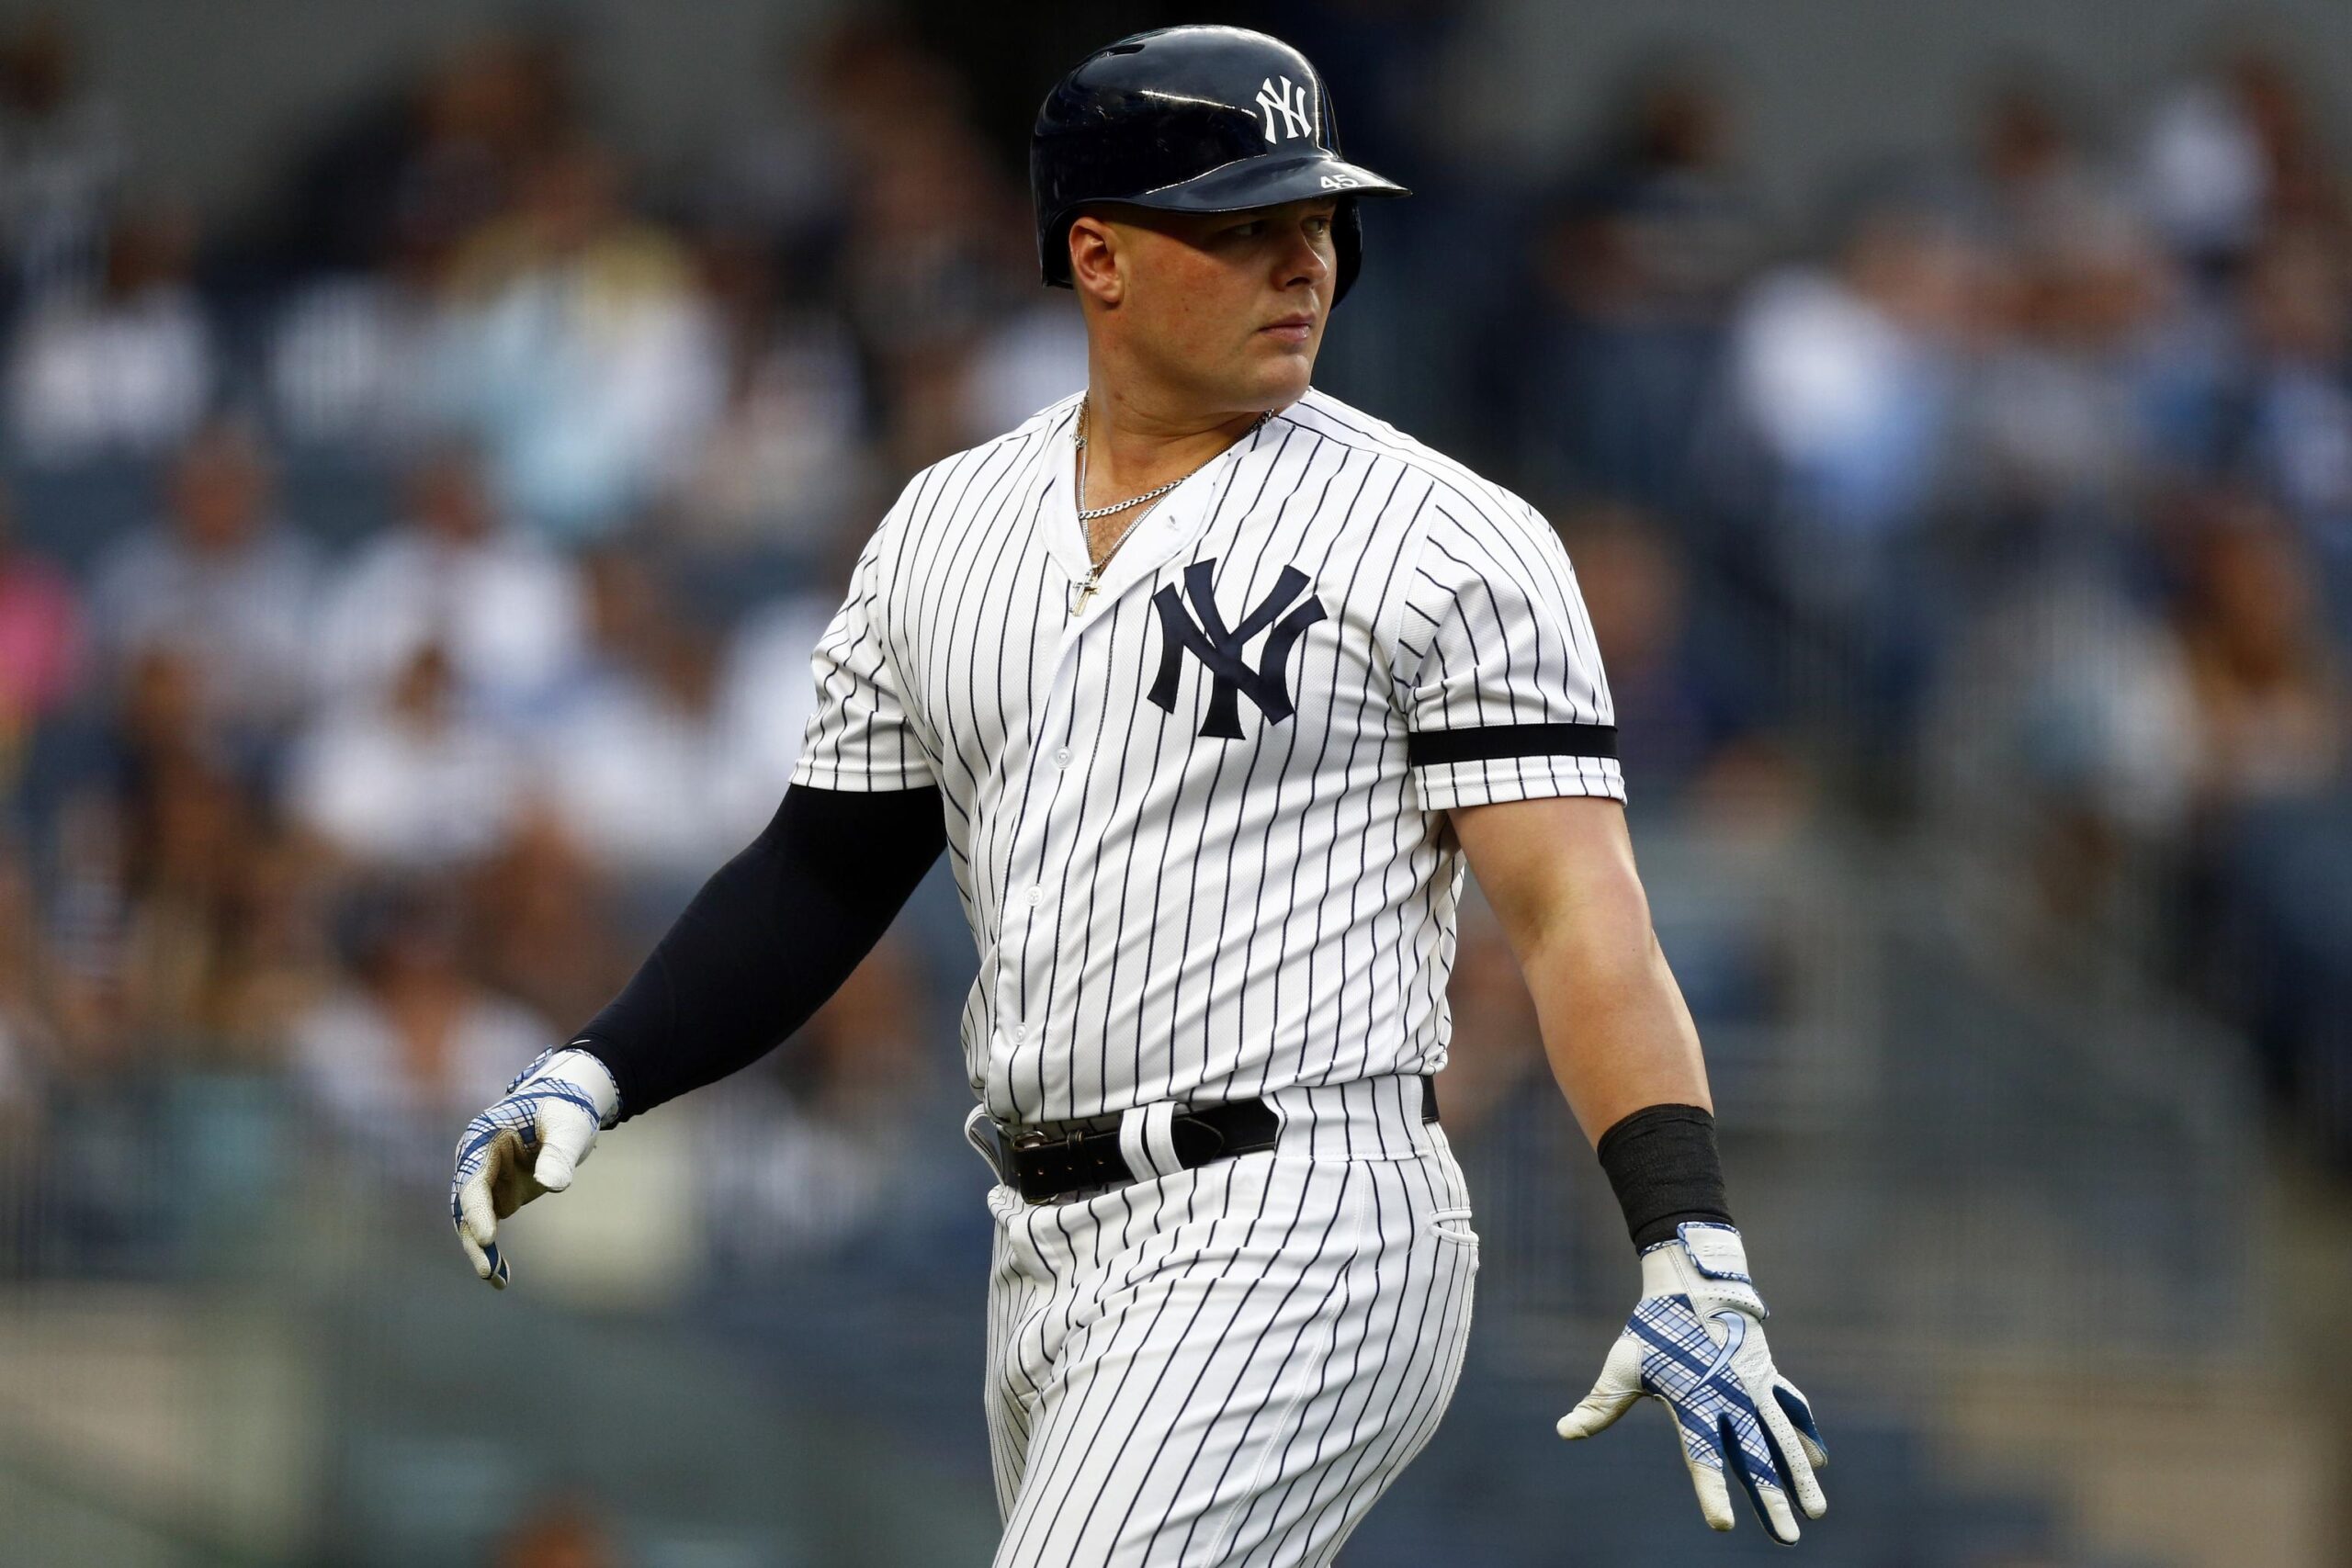 Yankees trade first baseman Voit to Padres